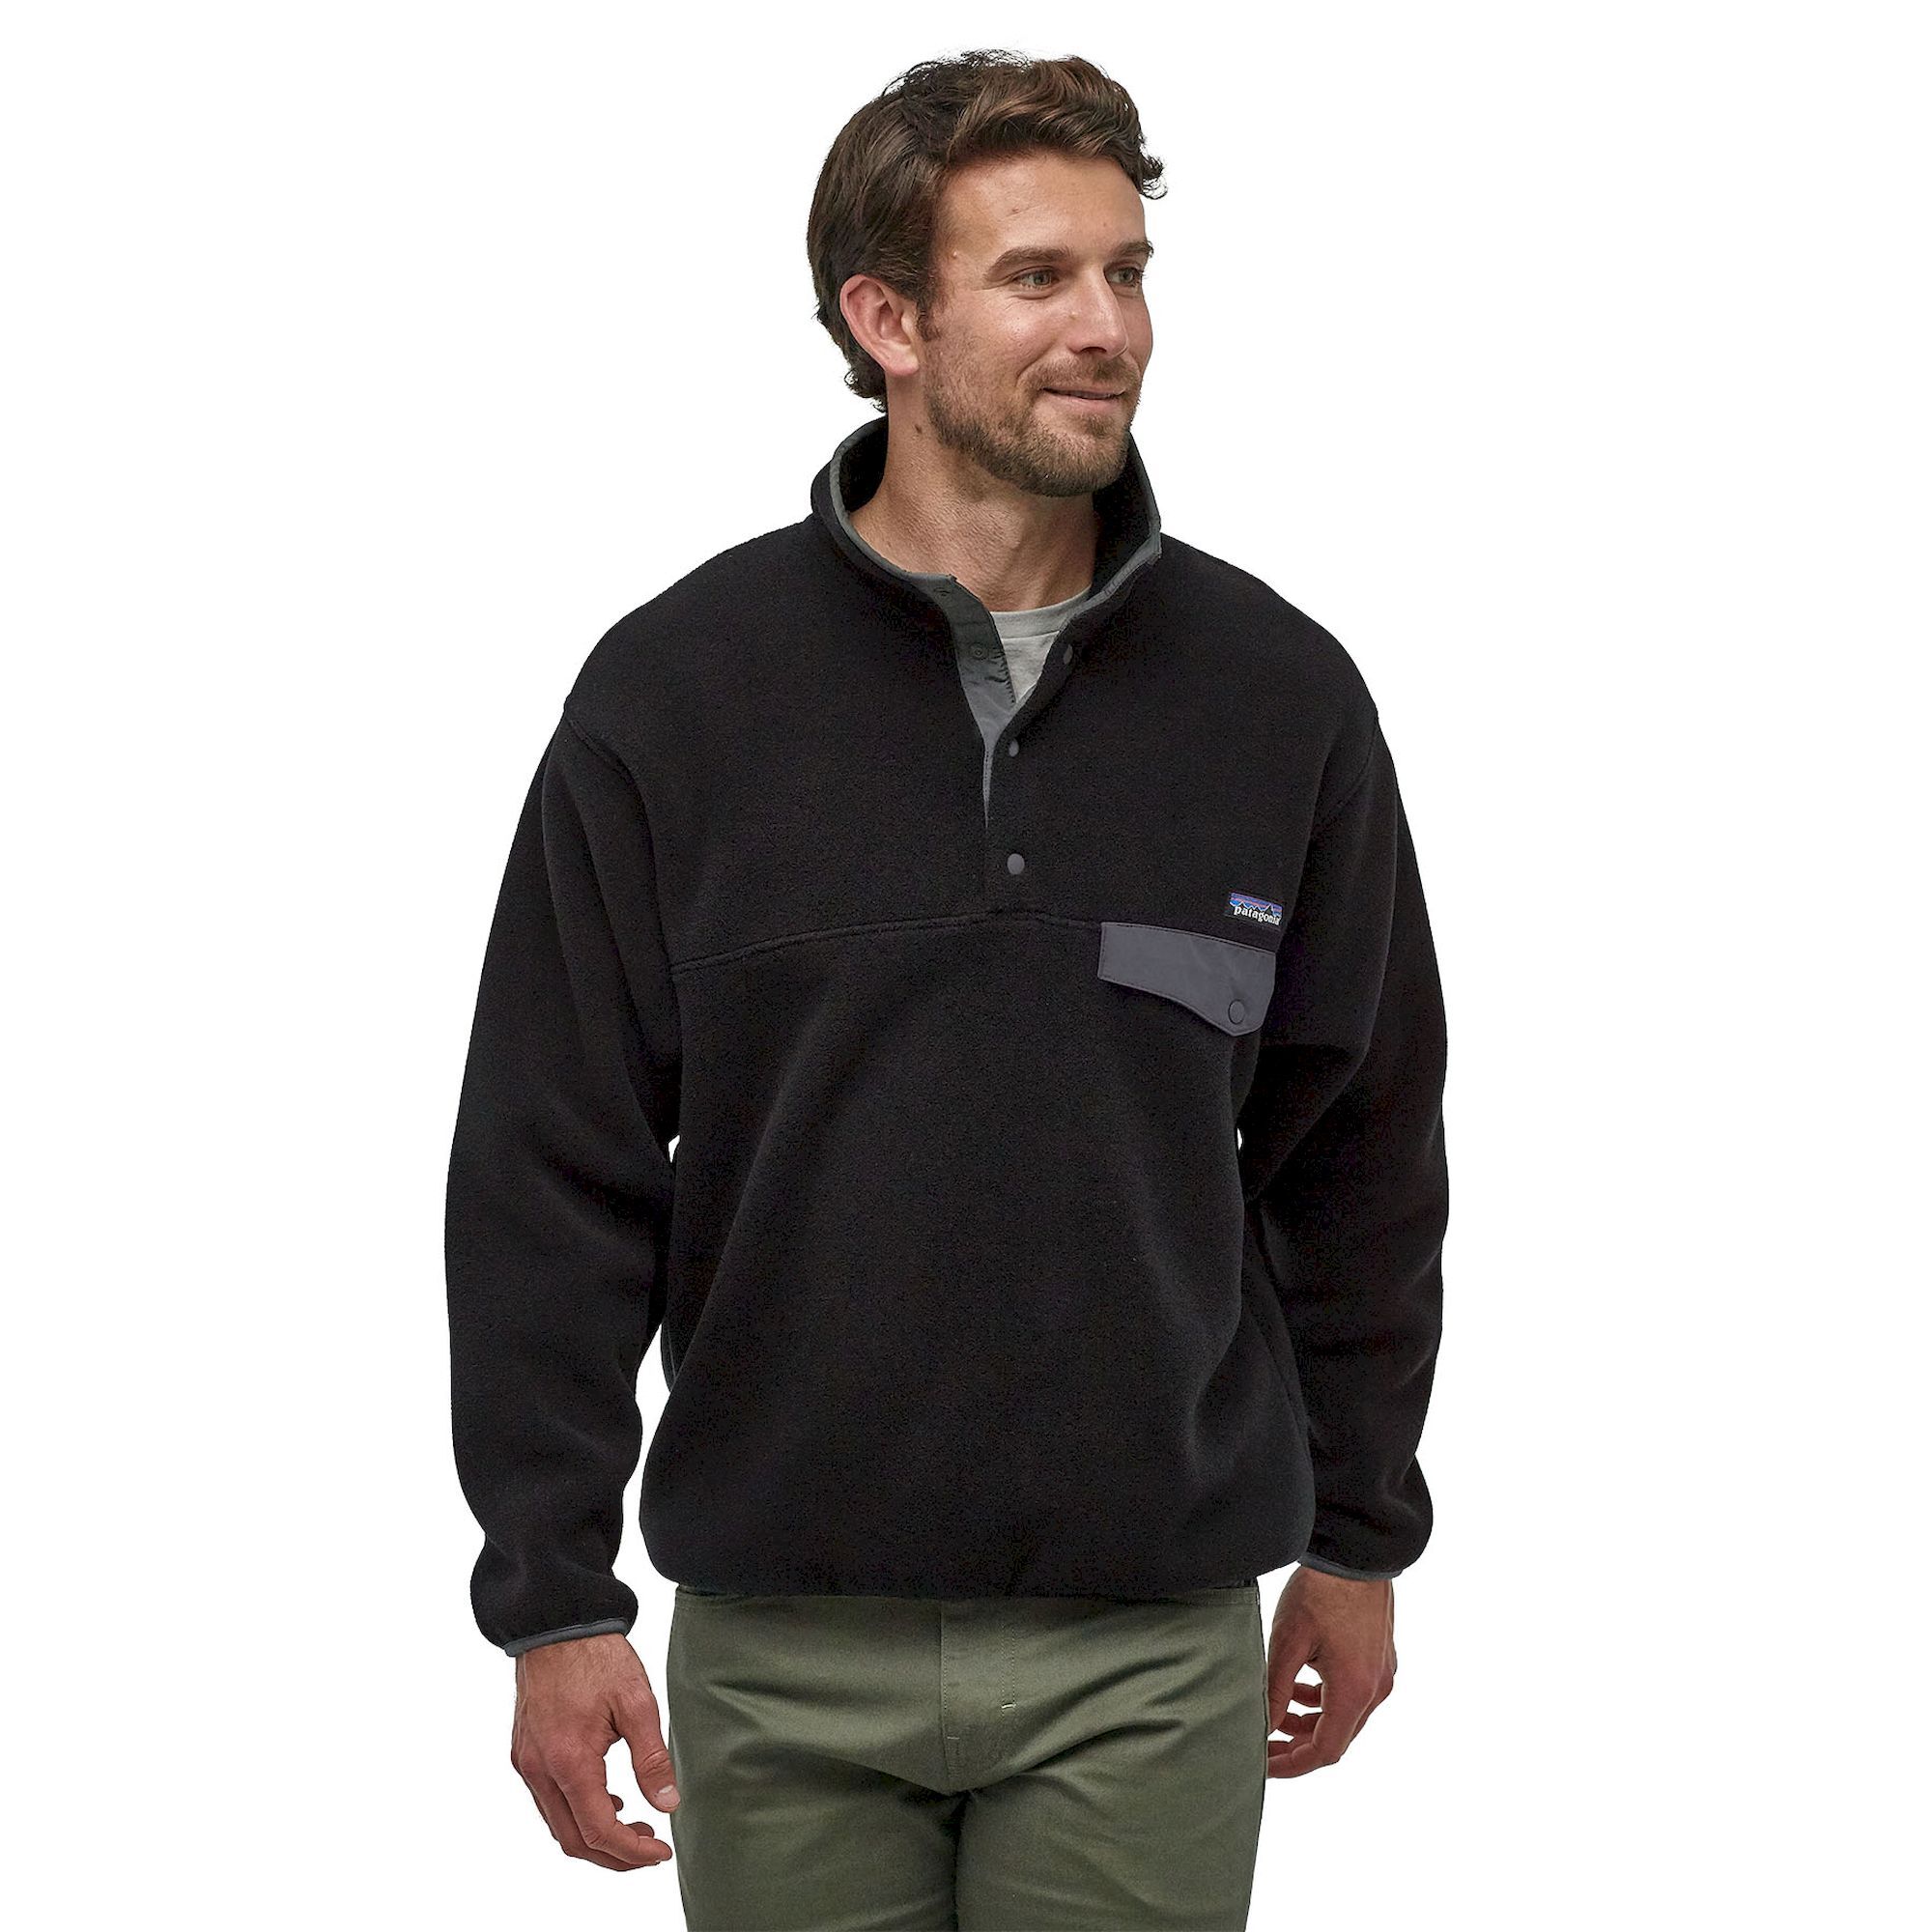 Patagonia - Synch Snap-T P/O - Giacca in pile - Uomo